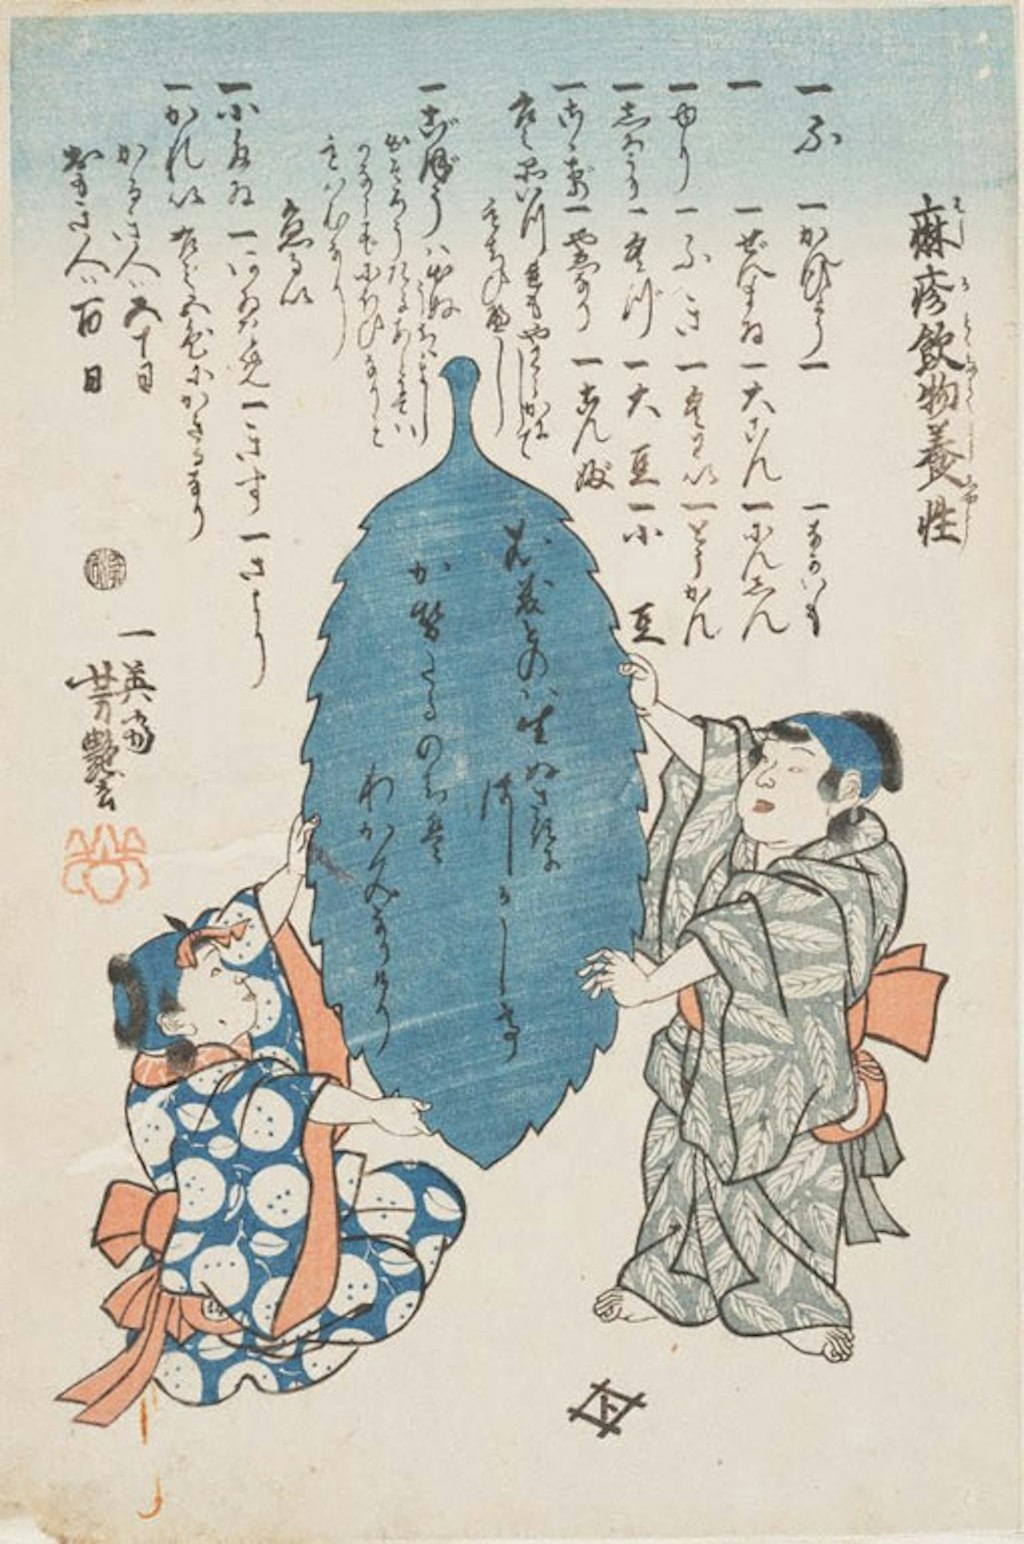 Two people in kimonoes, one standing, one squatting, with a large blue leaf between them. On the leaf and above the figures is Japanese text.